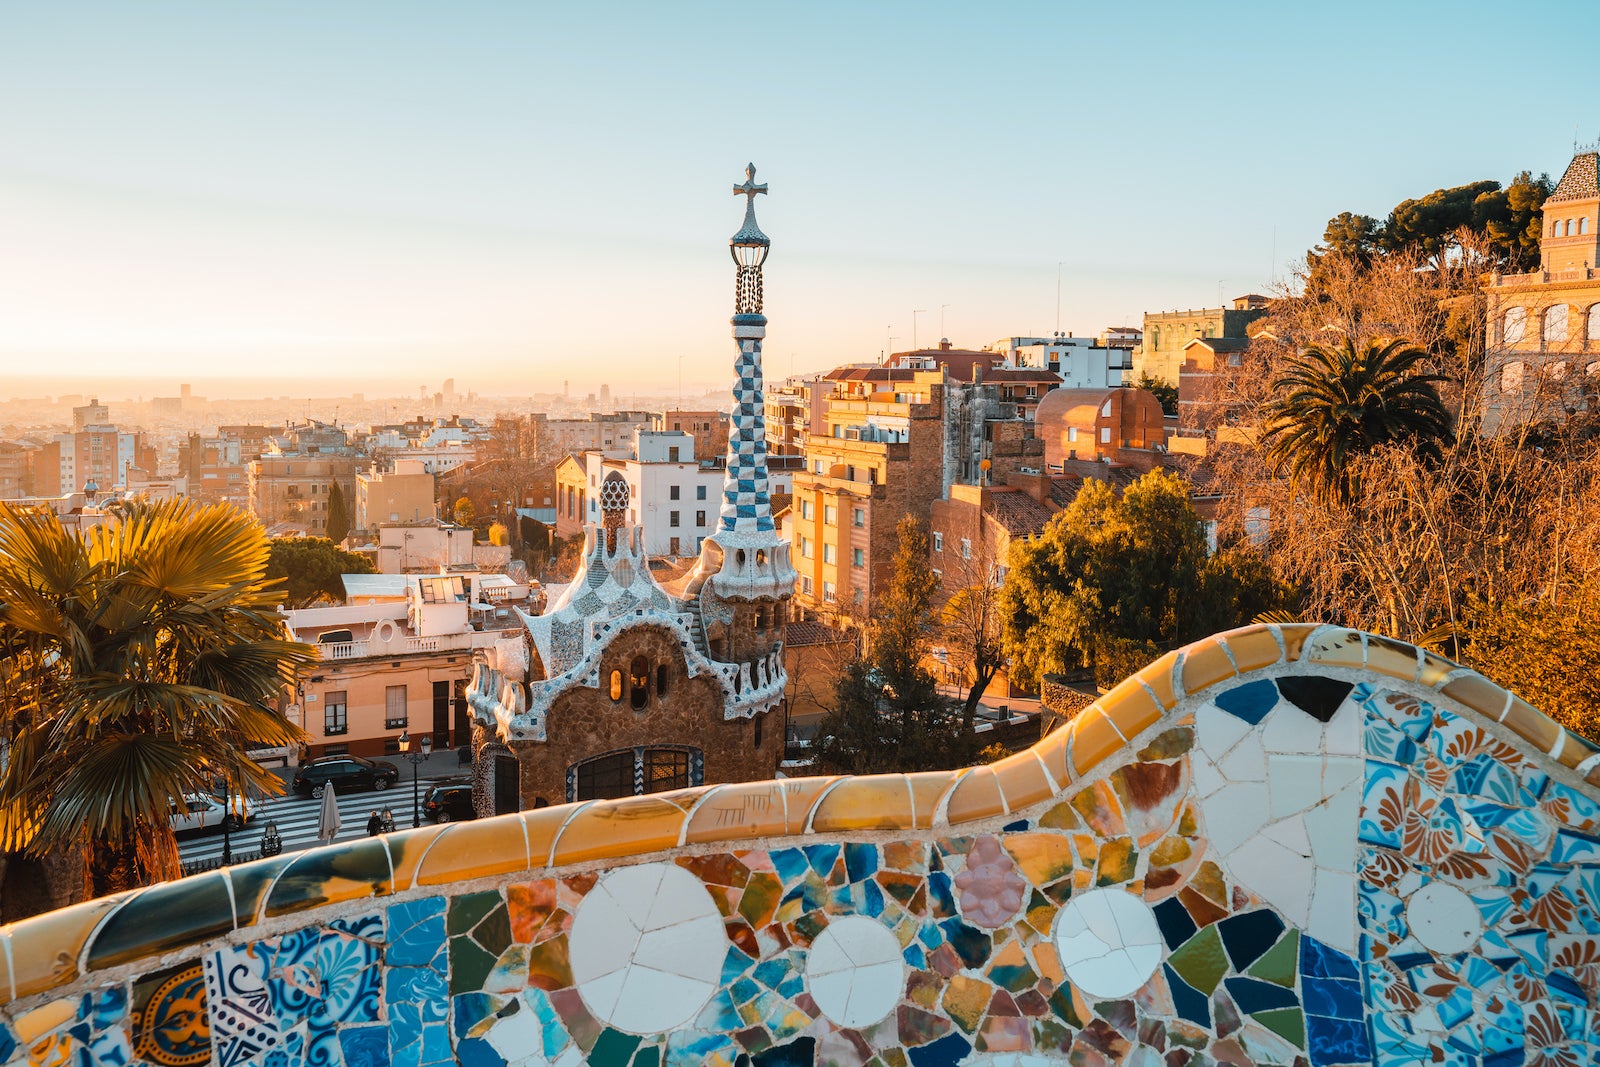 Europe deal alert: Fly to Barcelona, Berlin, Rome and other cities from $436 nonstop